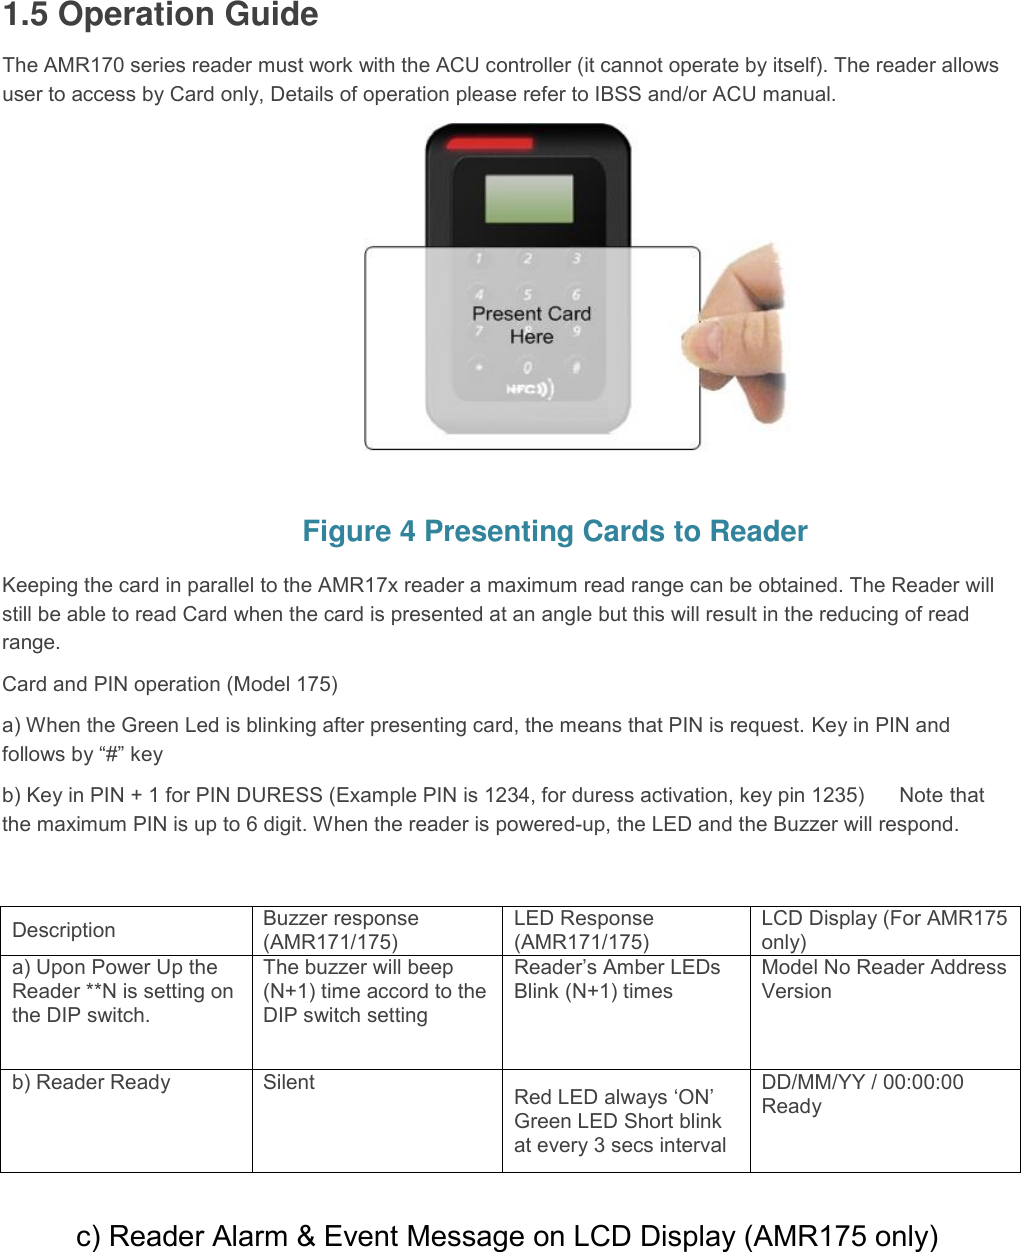  1.5 Operation Guide  The AMR170 series reader must work with the ACU controller (it cannot operate by itself). The reader allows user to access by Card only, Details of operation please refer to IBSS and/or ACU manual.          Figure 4 Presenting Cards to Reader Keeping the card in parallel to the AMR17x reader a maximum read range can be obtained. The Reader will still be able to read Card when the card is presented at an angle but this will result in the reducing of read range.  Card and PIN operation (Model 175)  a) When the Green Led is blinking after presenting card, the means that PIN is request. Key in PIN and follows by “#” key  b) Key in PIN + 1 for PIN DURESS (Example PIN is 1234, for duress activation, key pin 1235)      Note that the maximum PIN is up to 6 digit. When the reader is powered-up, the LED and the Buzzer will respond.    c) Reader Alarm &amp; Event Message on LCD Display (AMR175 only)  Description  Buzzer response (AMR171/175)  LED Response (AMR171/175)  LCD Display (For AMR175 only)  a) Upon Power Up the Reader **N is setting on the DIP switch.  The buzzer will beep (N+1) time accord to the DIP switch setting  Reader’s Amber LEDs Blink (N+1) times  Model No Reader Address Version  b) Reader Ready  Silent  Red LED always ‘ON’ Green LED Short blink at every 3 secs interval  DD/MM/YY / 00:00:00 Ready  